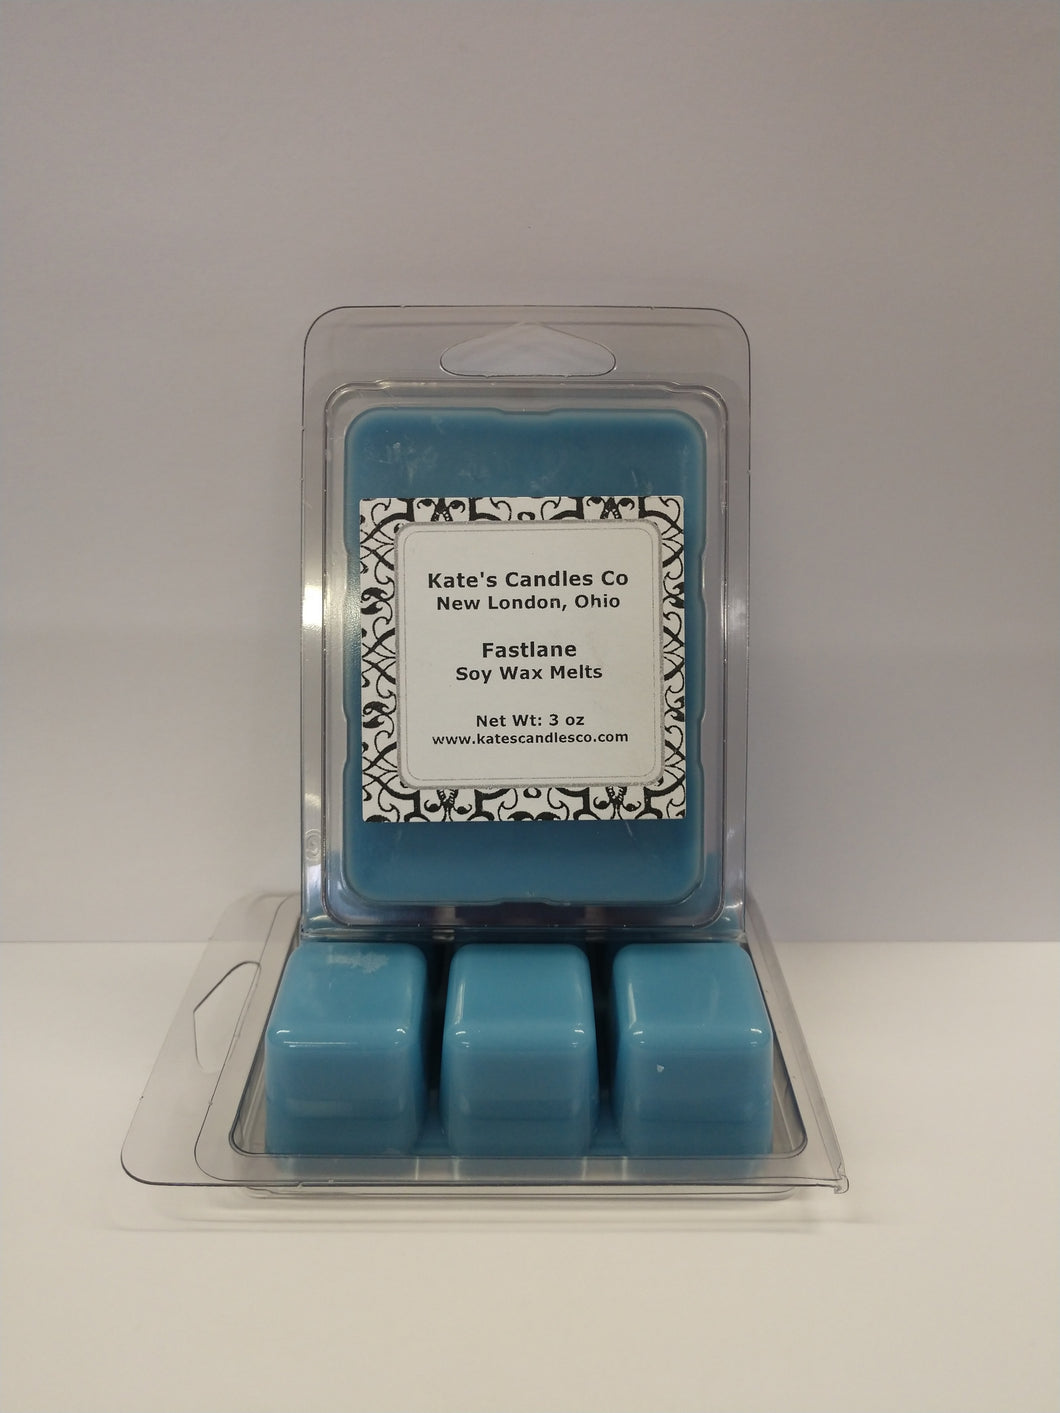 Fast Lane Soy Wax Melts - Kate's Candles Co. Soy Candles